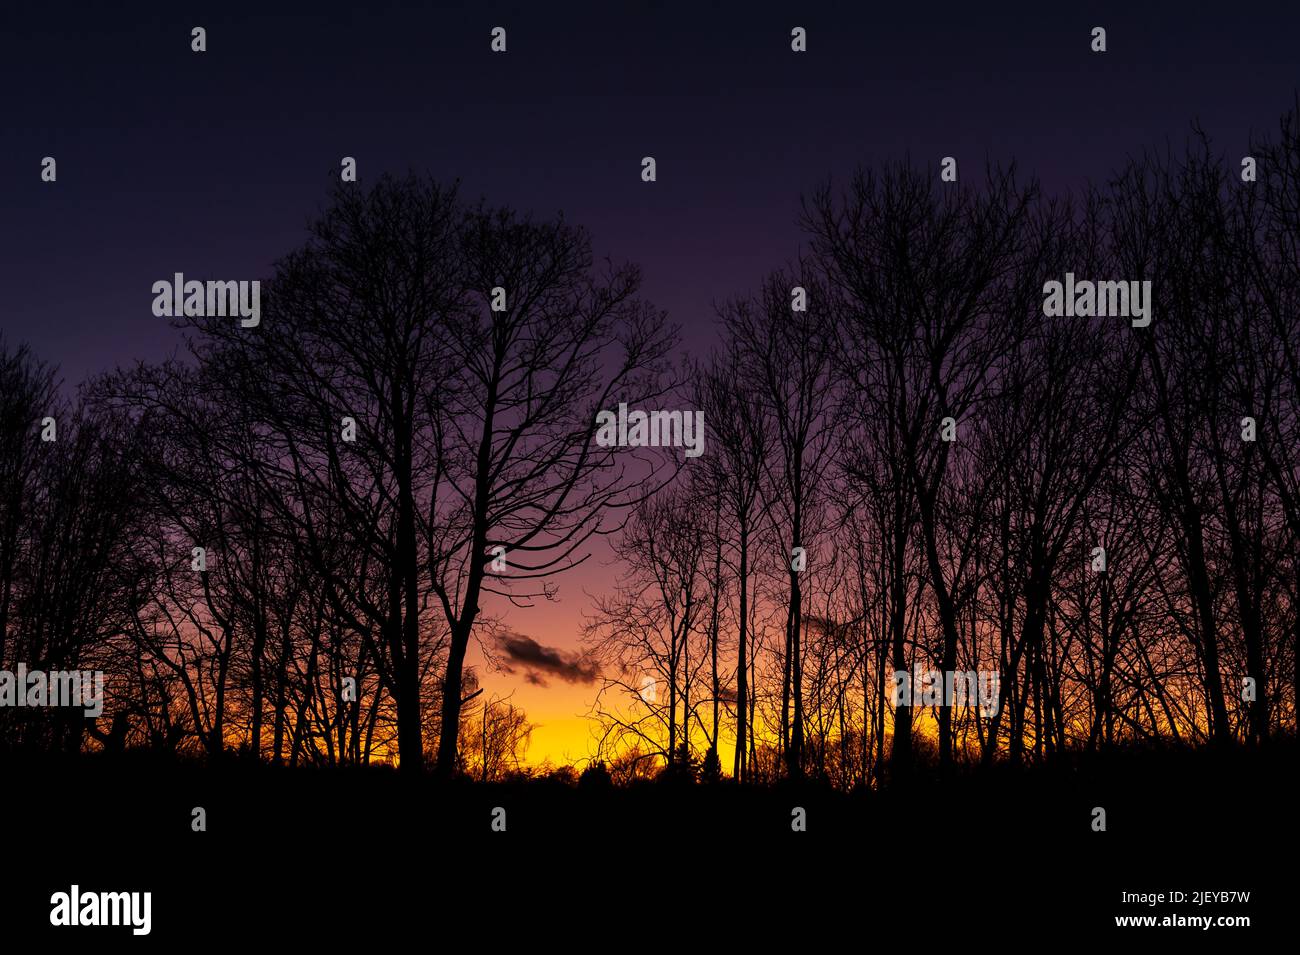 Dark threatening purple clouds with setting or rising sun against a row of large mature trees ash, silver birch Stock Photo